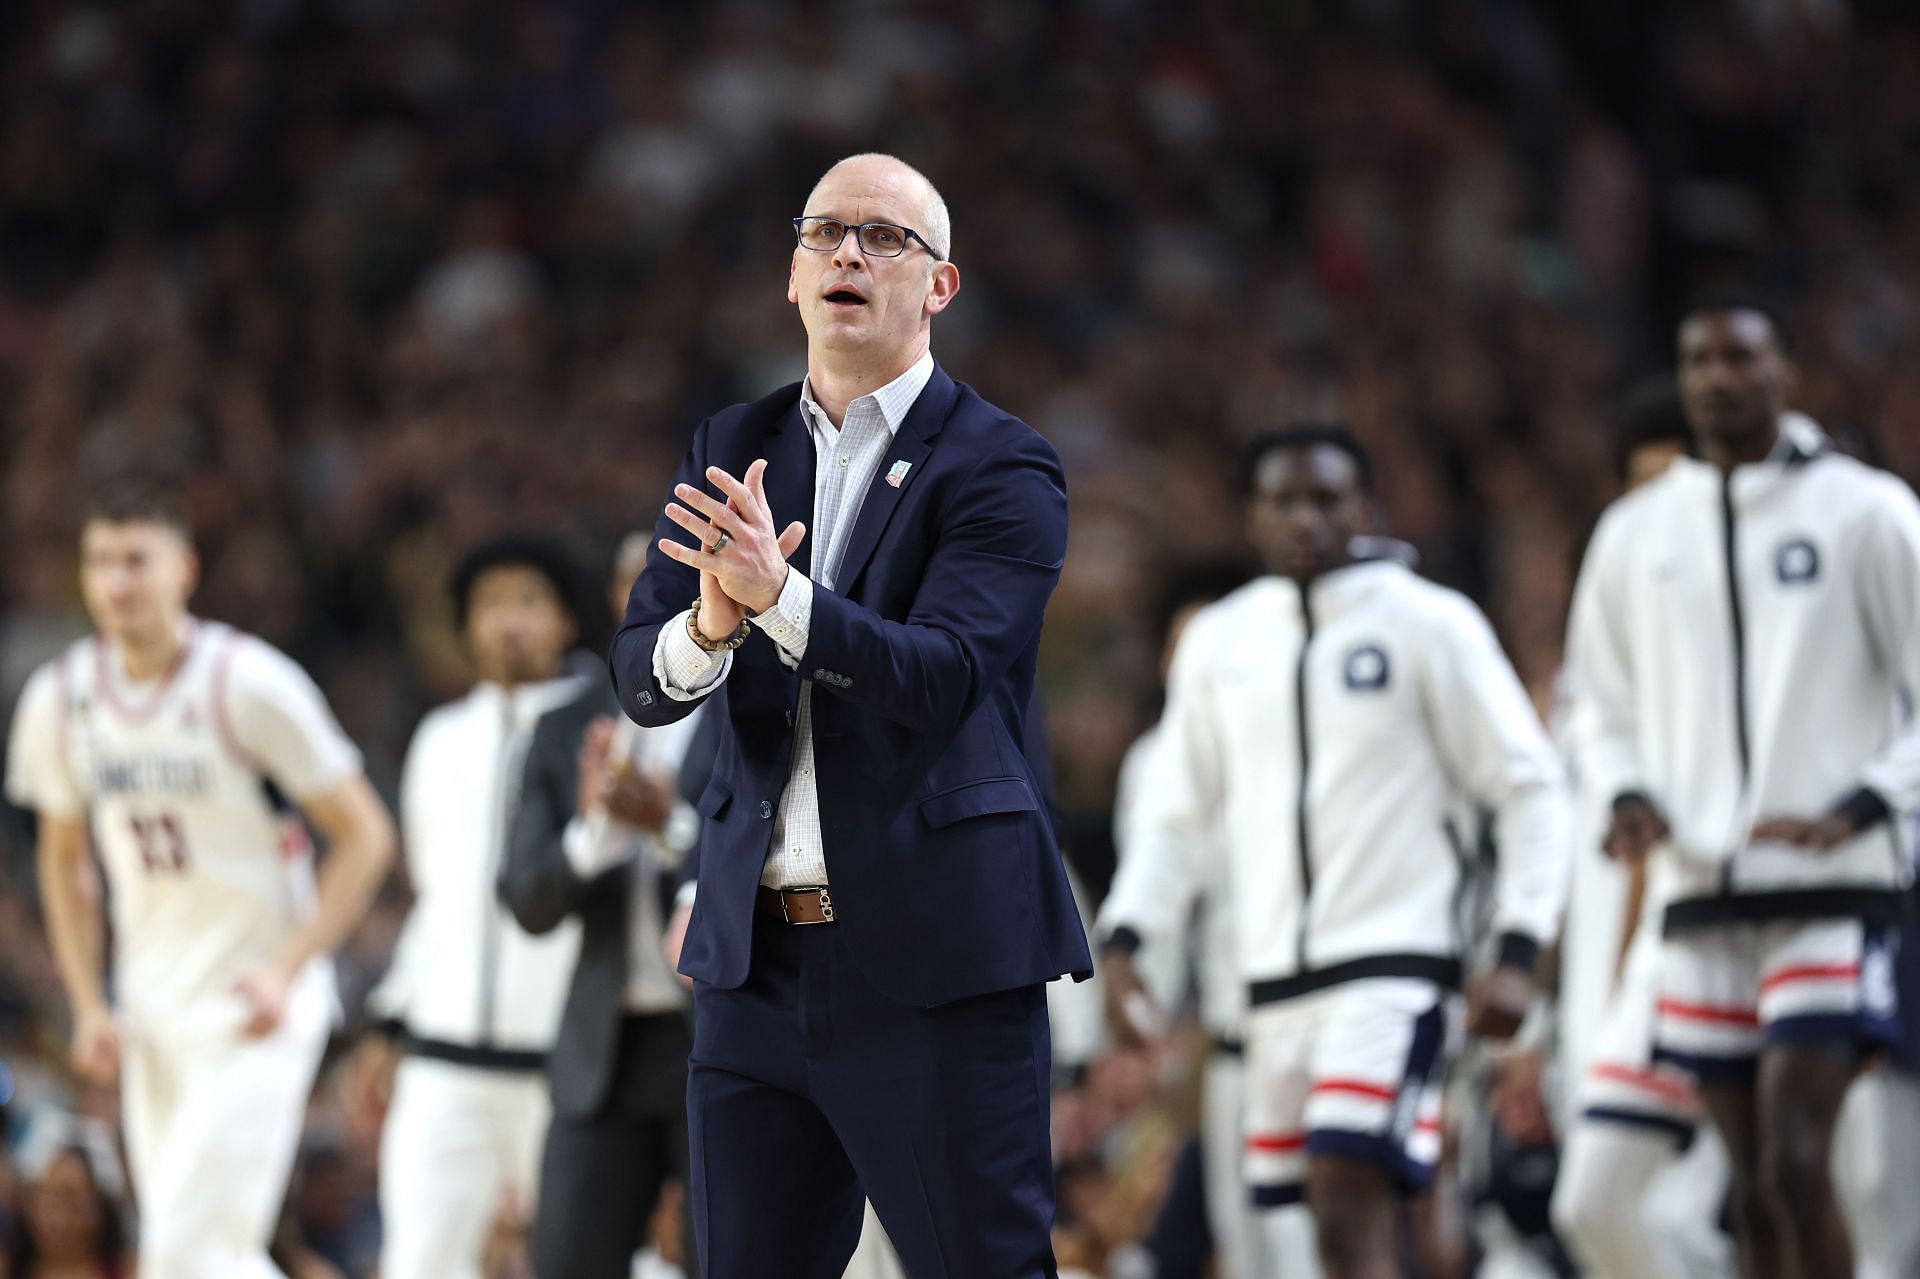 UConn coach Dan Hurley is a win away from guiding the Huskies to back-to-back national championships.